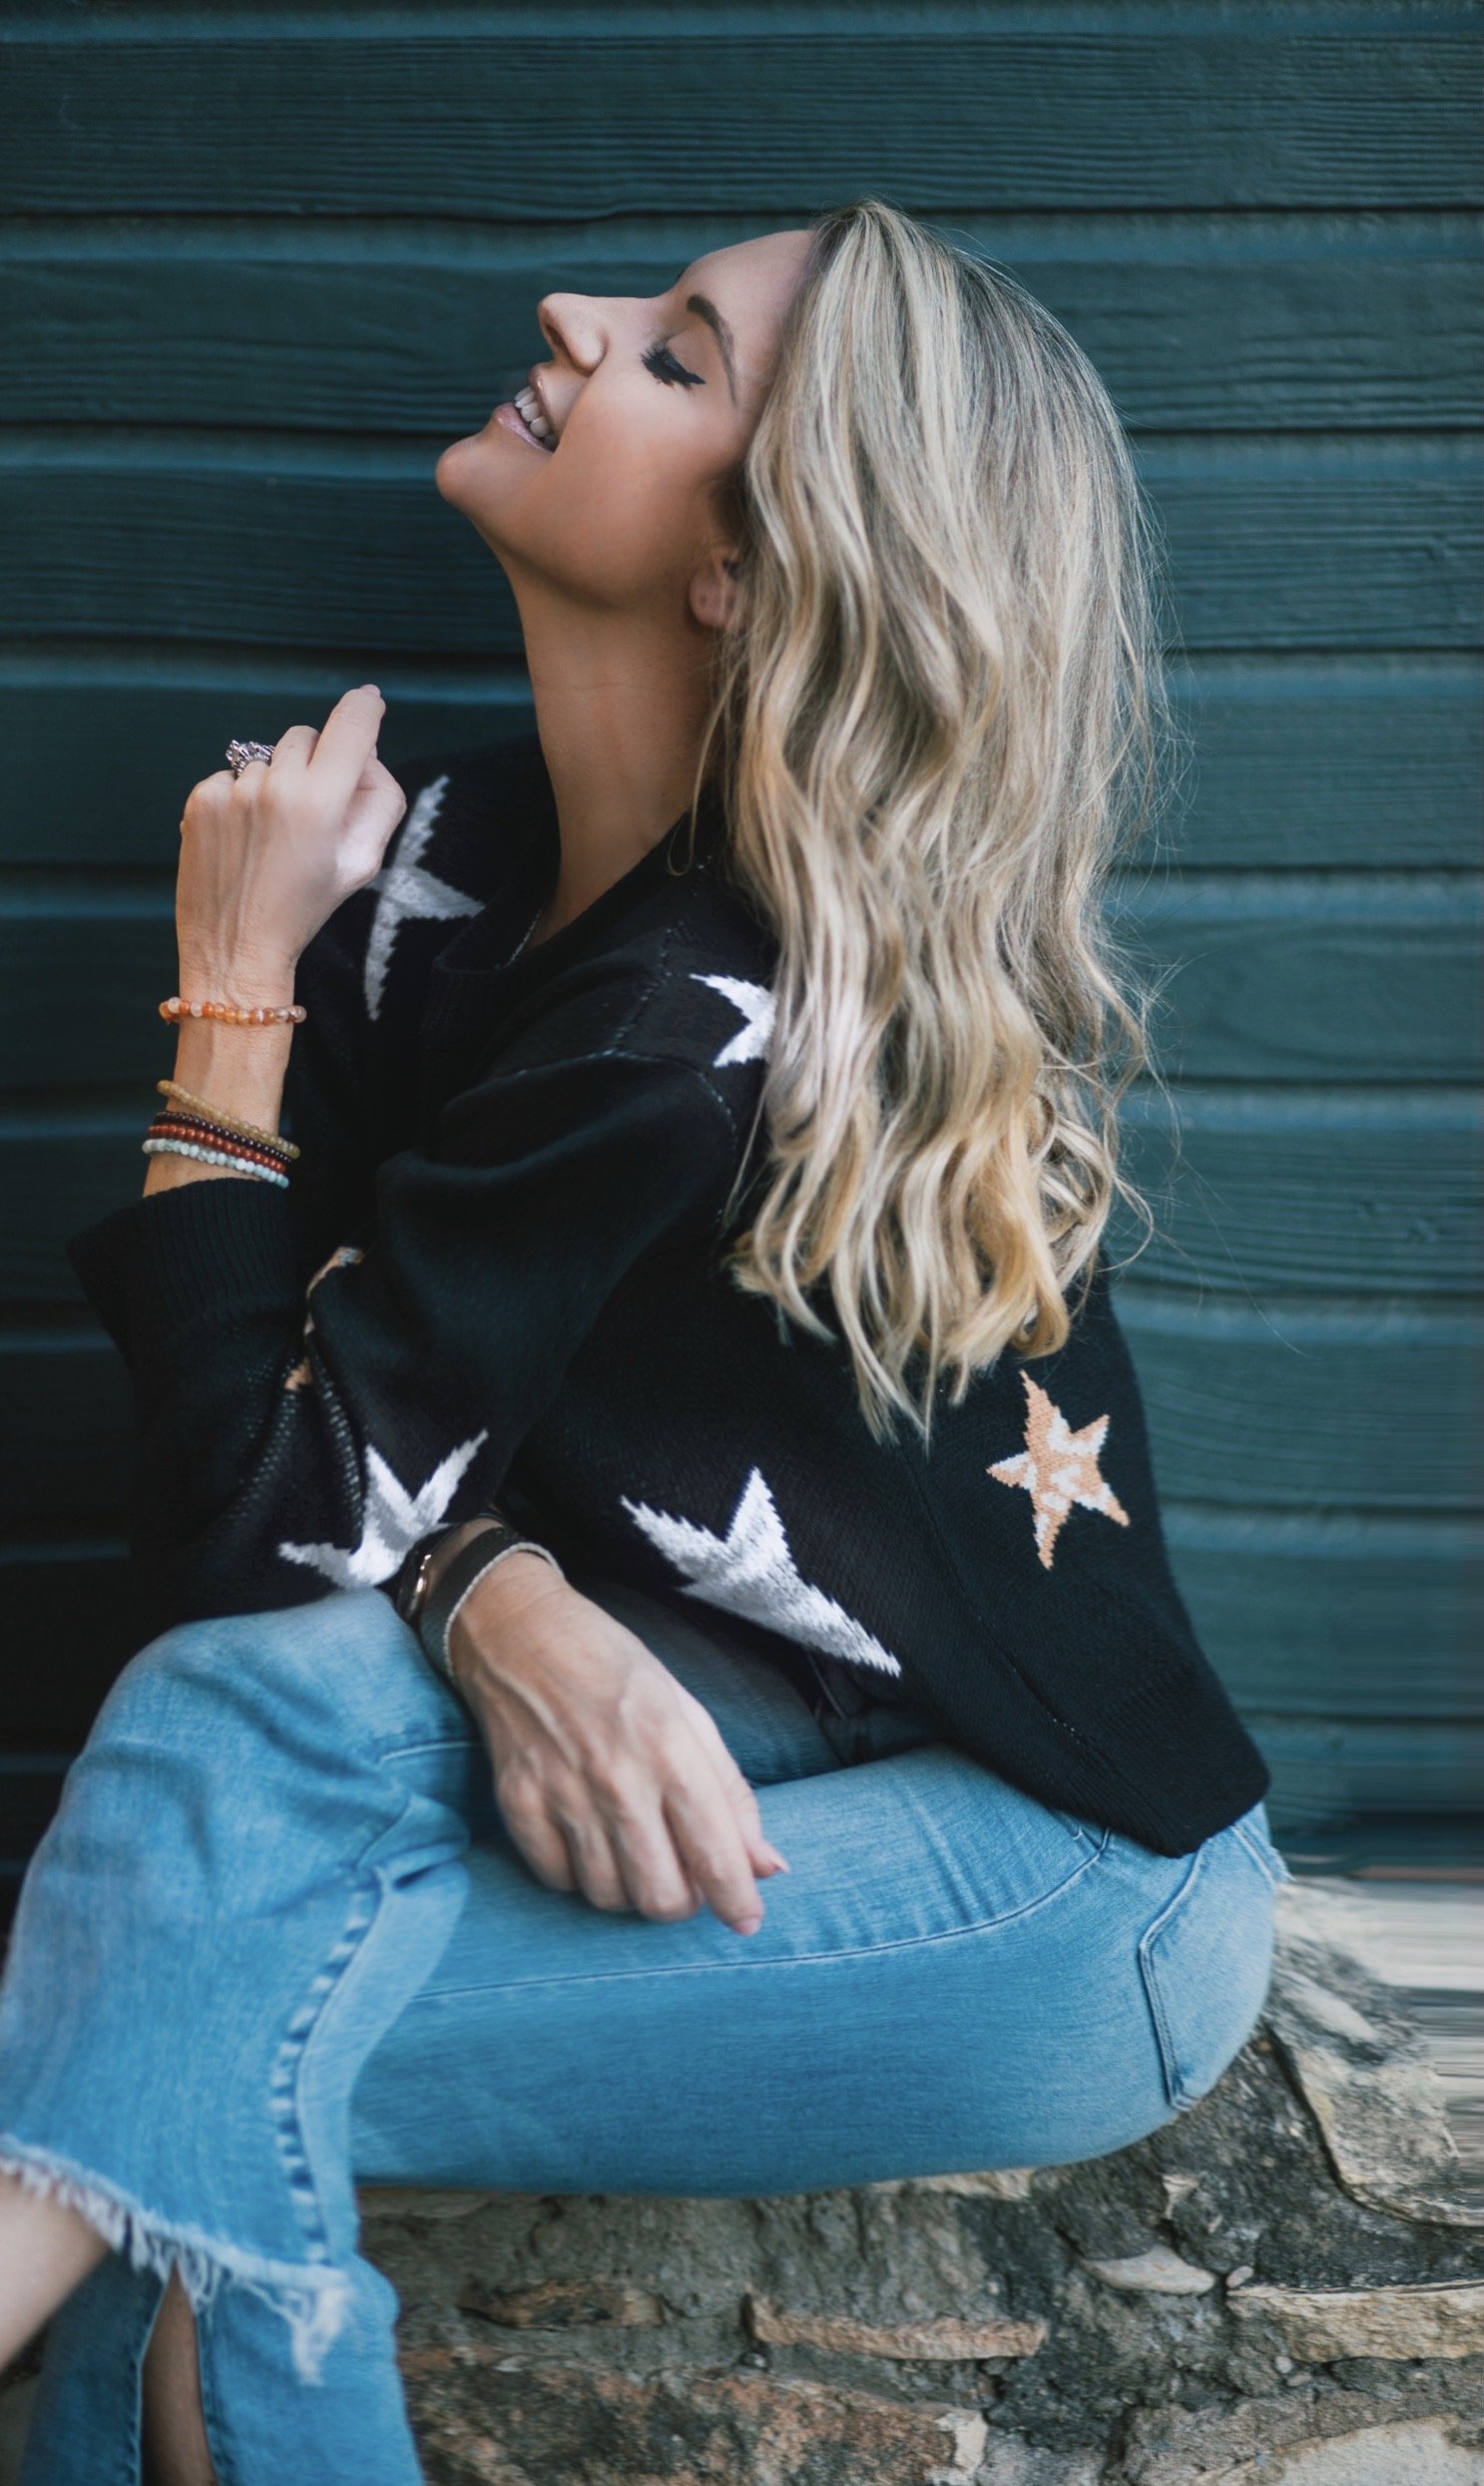 a woman sitting sideways with her head looking up and eyes closed. she teaches how the law of attraction works. she is wearing a navy shirt with white stars. she has blonde hair. the background is a teal colored wood